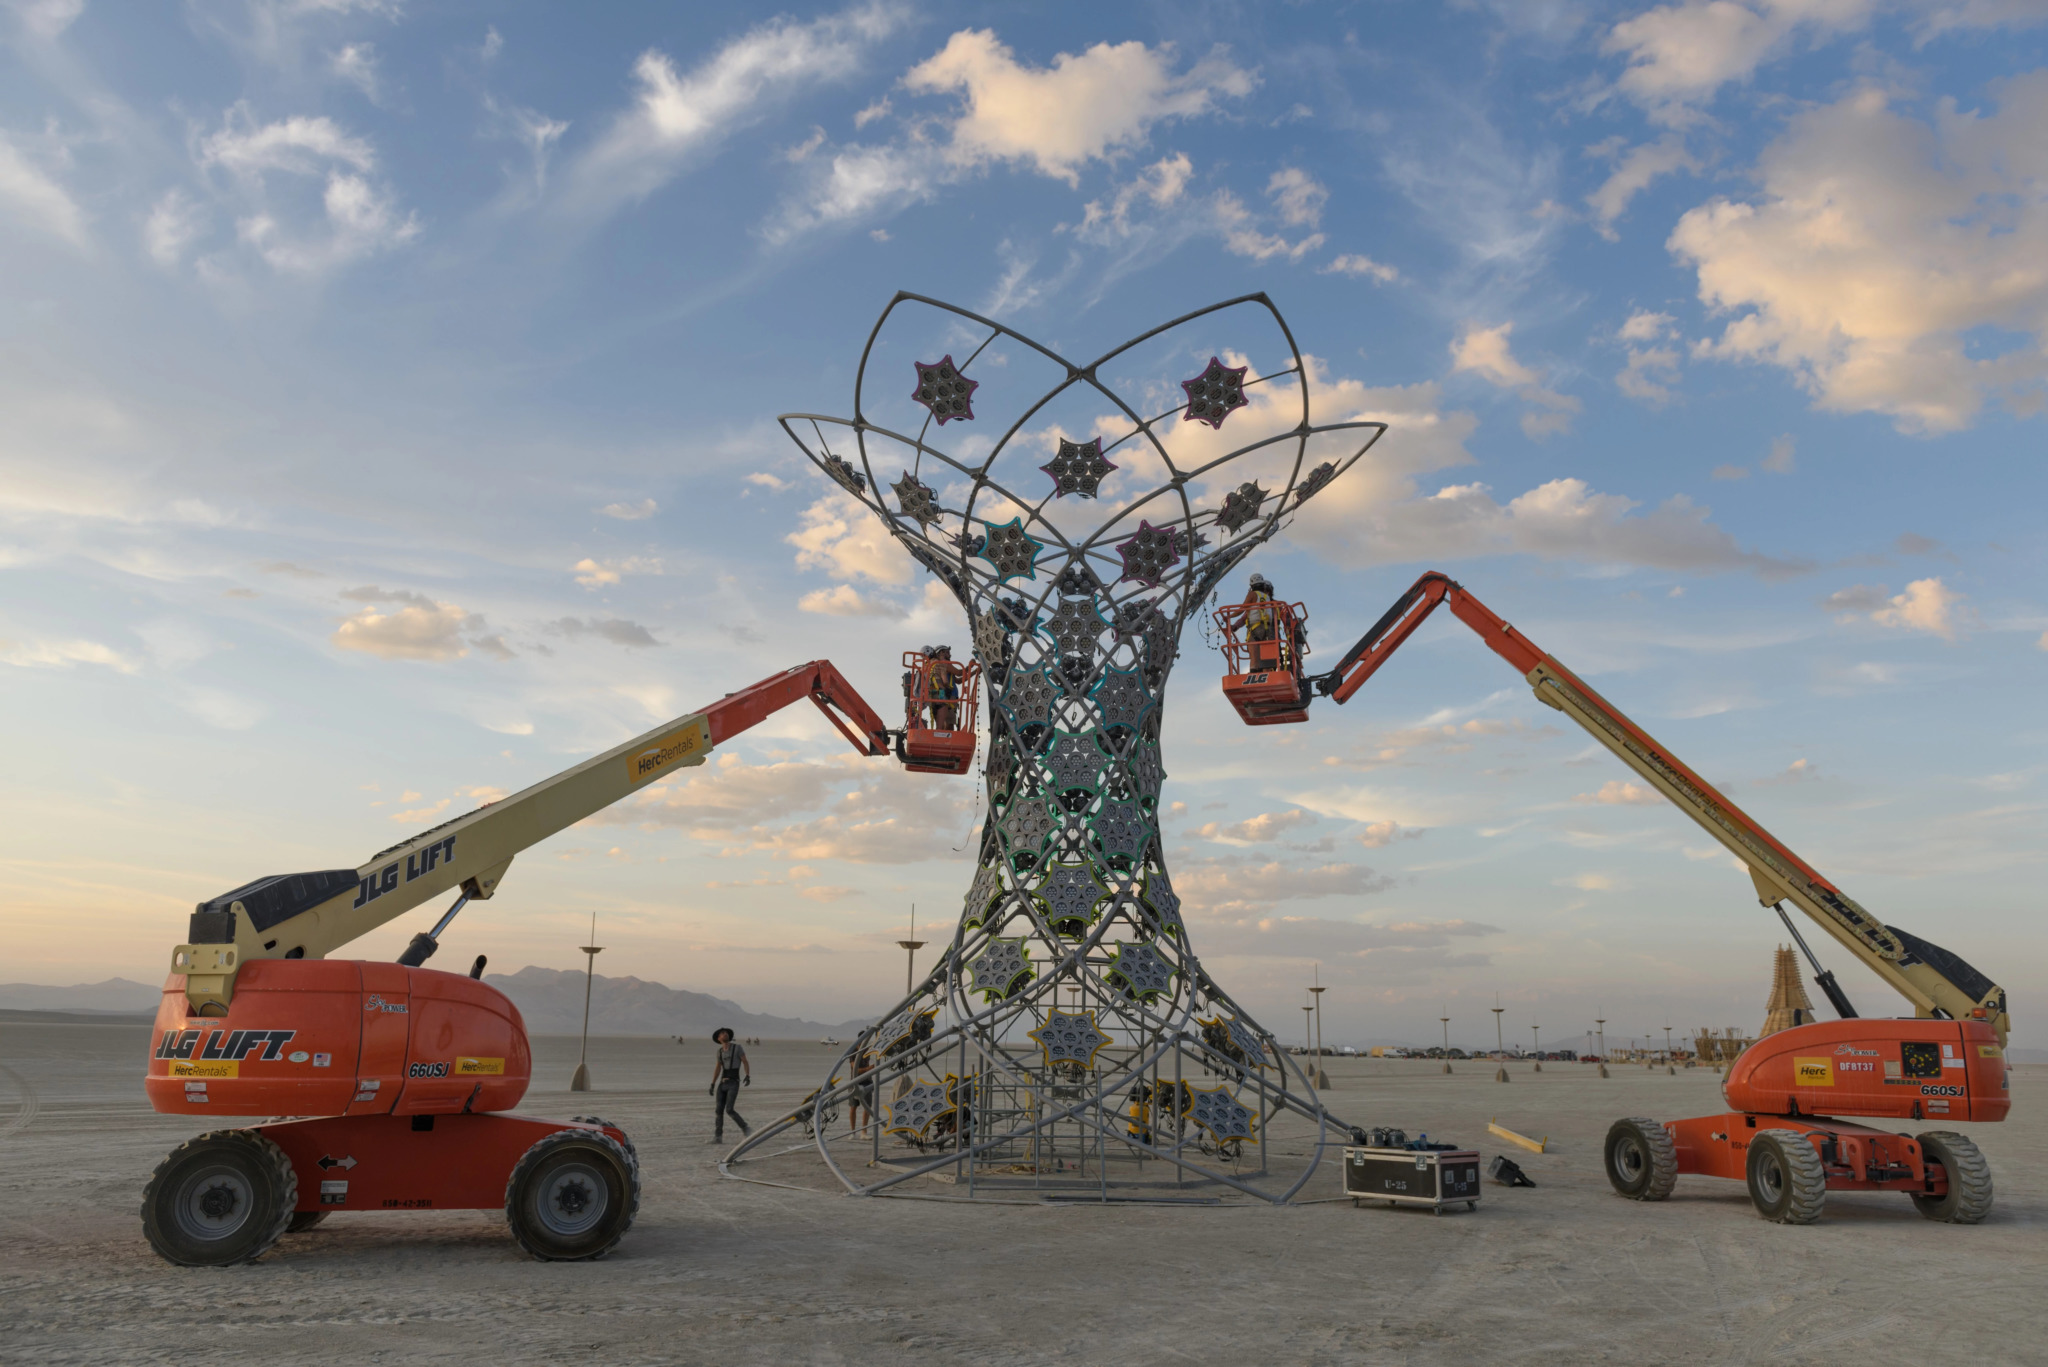 The Power of Participation: Transformation at Burning Man